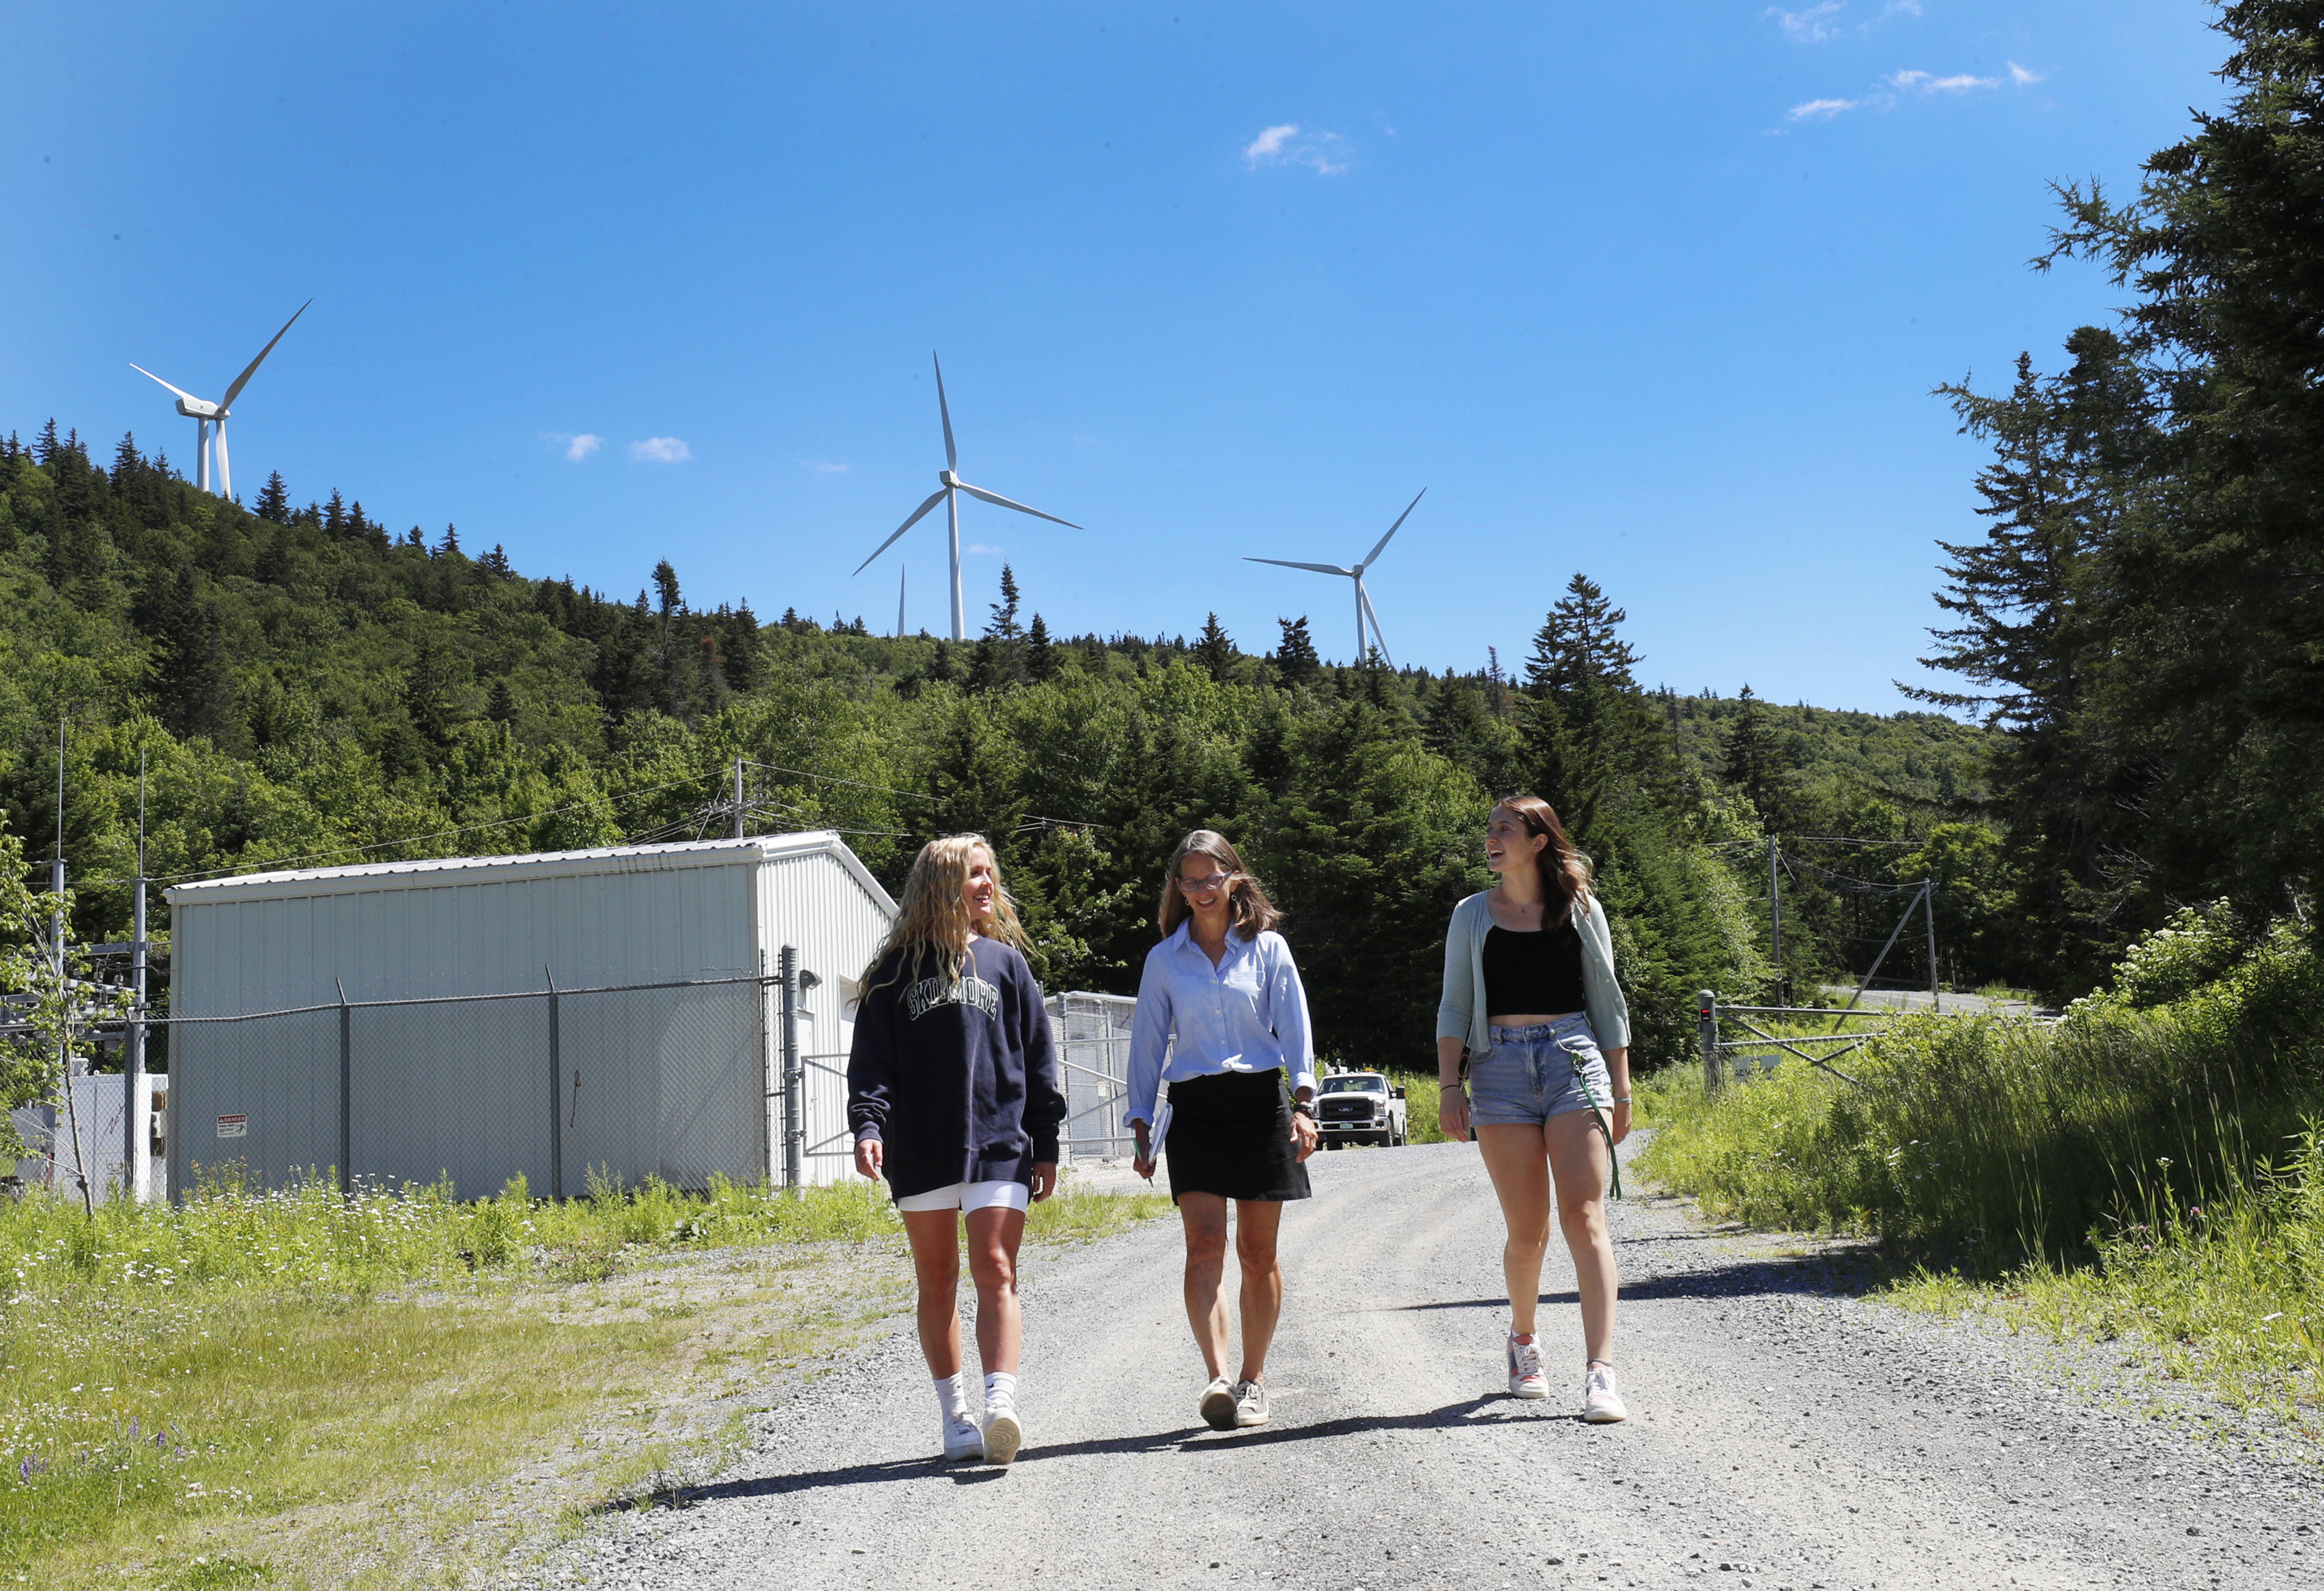 Karen Kellogg, associate professor of environmental studies and sciences, center, talks with Skidmore College students Paige Karl  ’23, left, and Chloe Faehndrich ’23 at a wind farm in Vermont as part of the summer collaborative research program.  